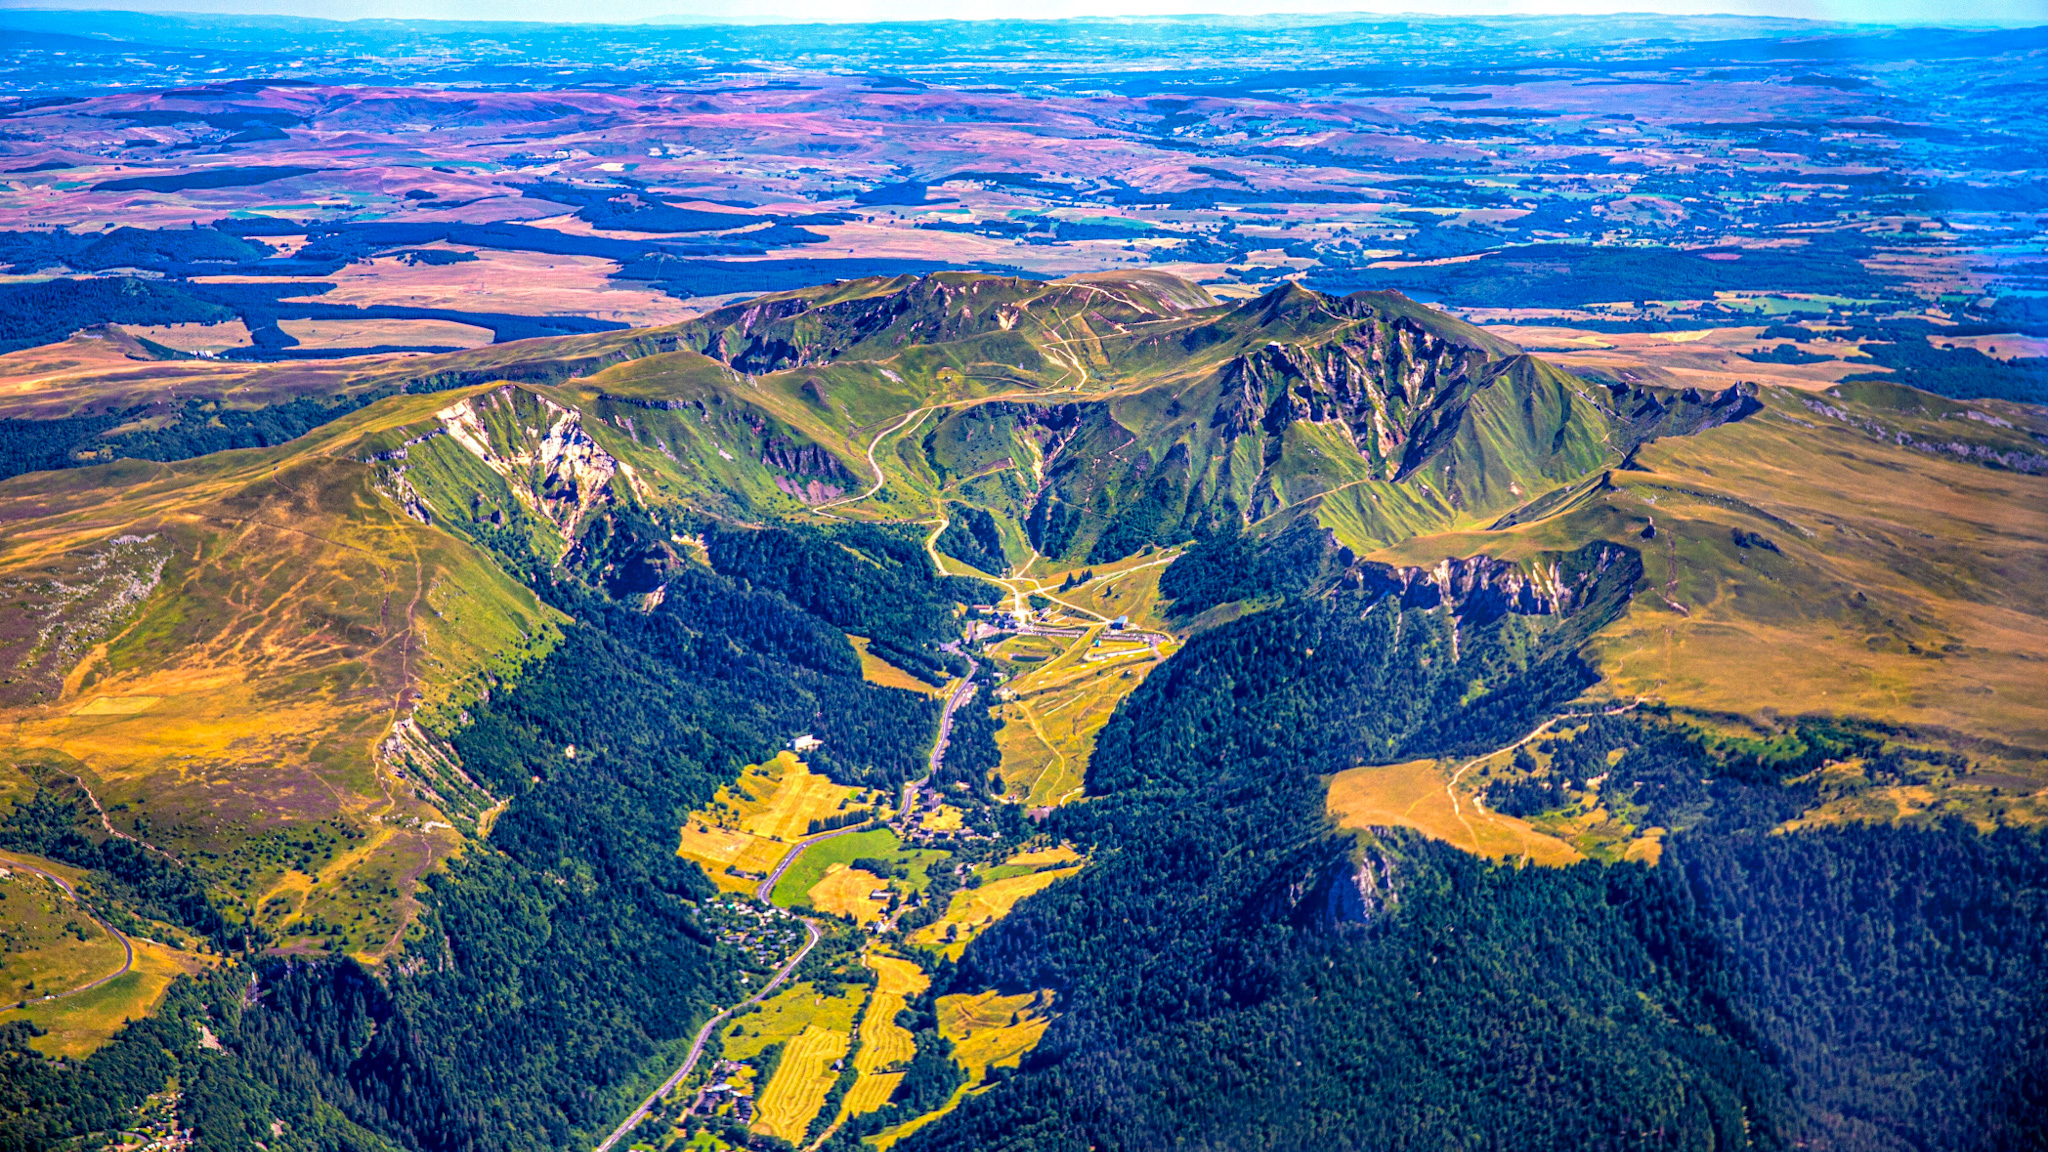 Massif du Sancy, panorama over the entire Massif du Sancy, Puy de Sancy, Puy Ferrand, Val de Courre, Val d'Enfer